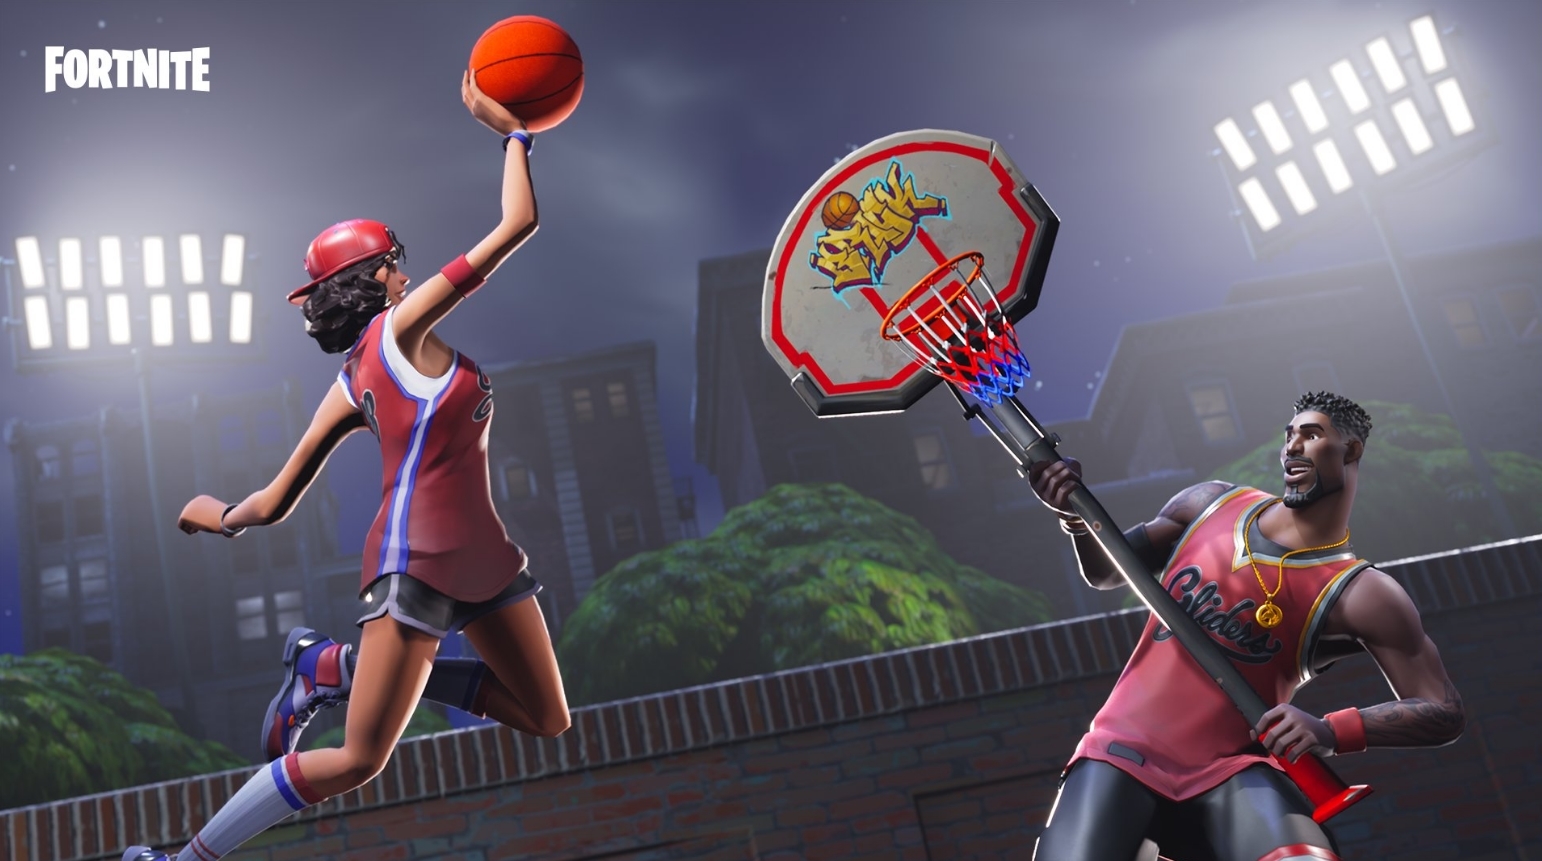 here s where to find basketball hoops in fortnite battle royale - 5 basketball hoops in fortnite